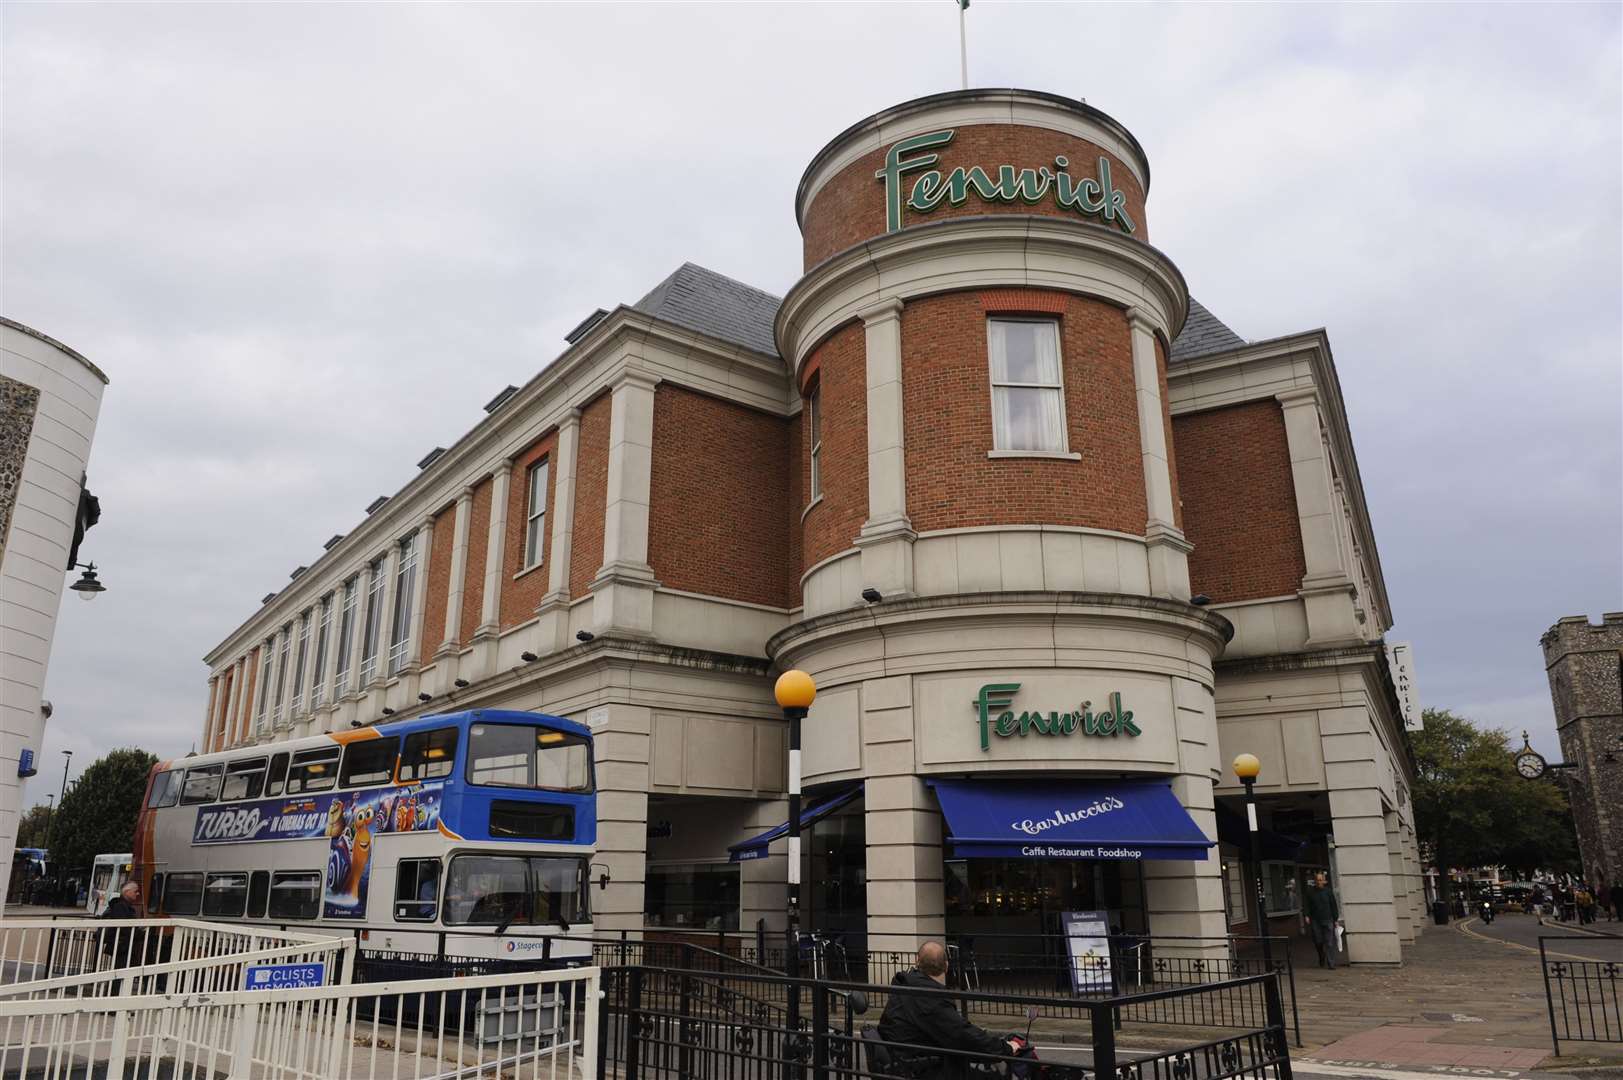 Fuego is planned to become the new restaurant tenant at Fenwick, replacing Carluccio's